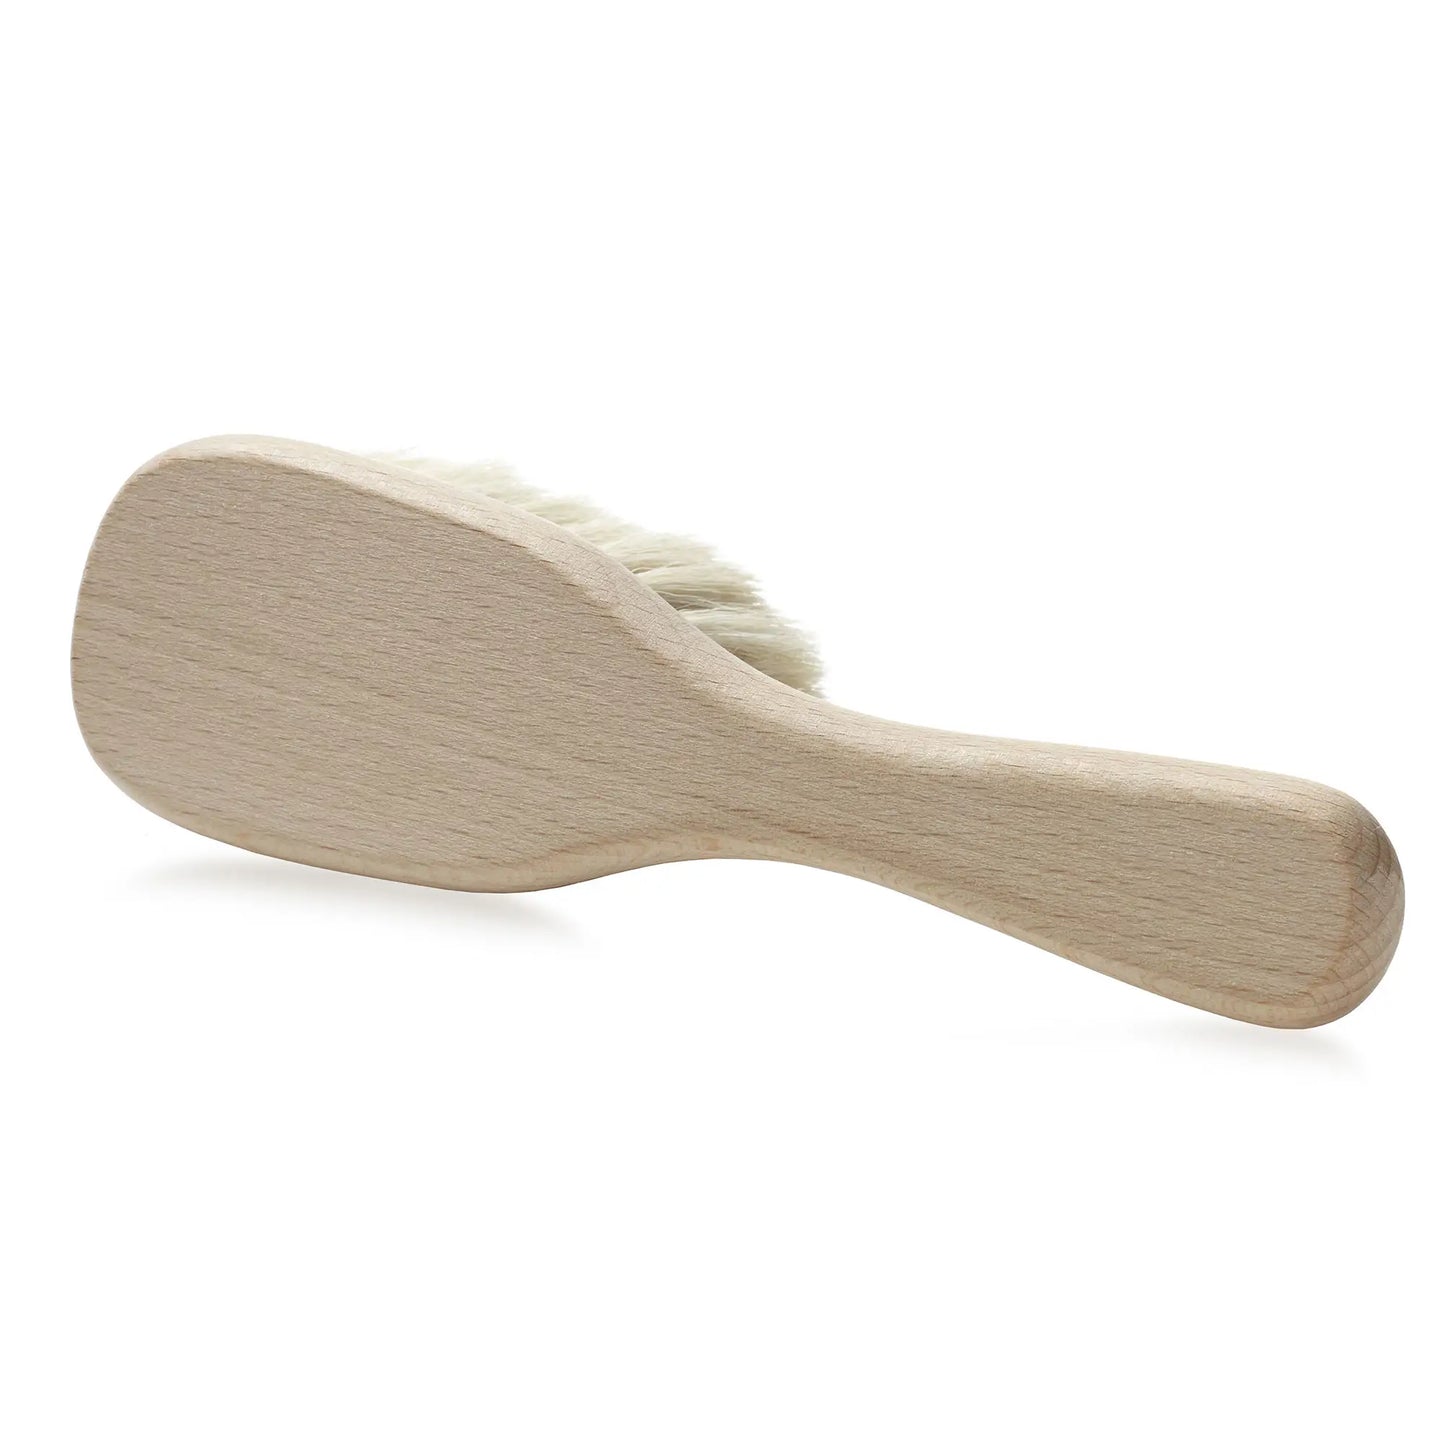 Wooden Baby Hair Brush with Natural Beech Wood and Goat Hair - Heartfelt Gift Box